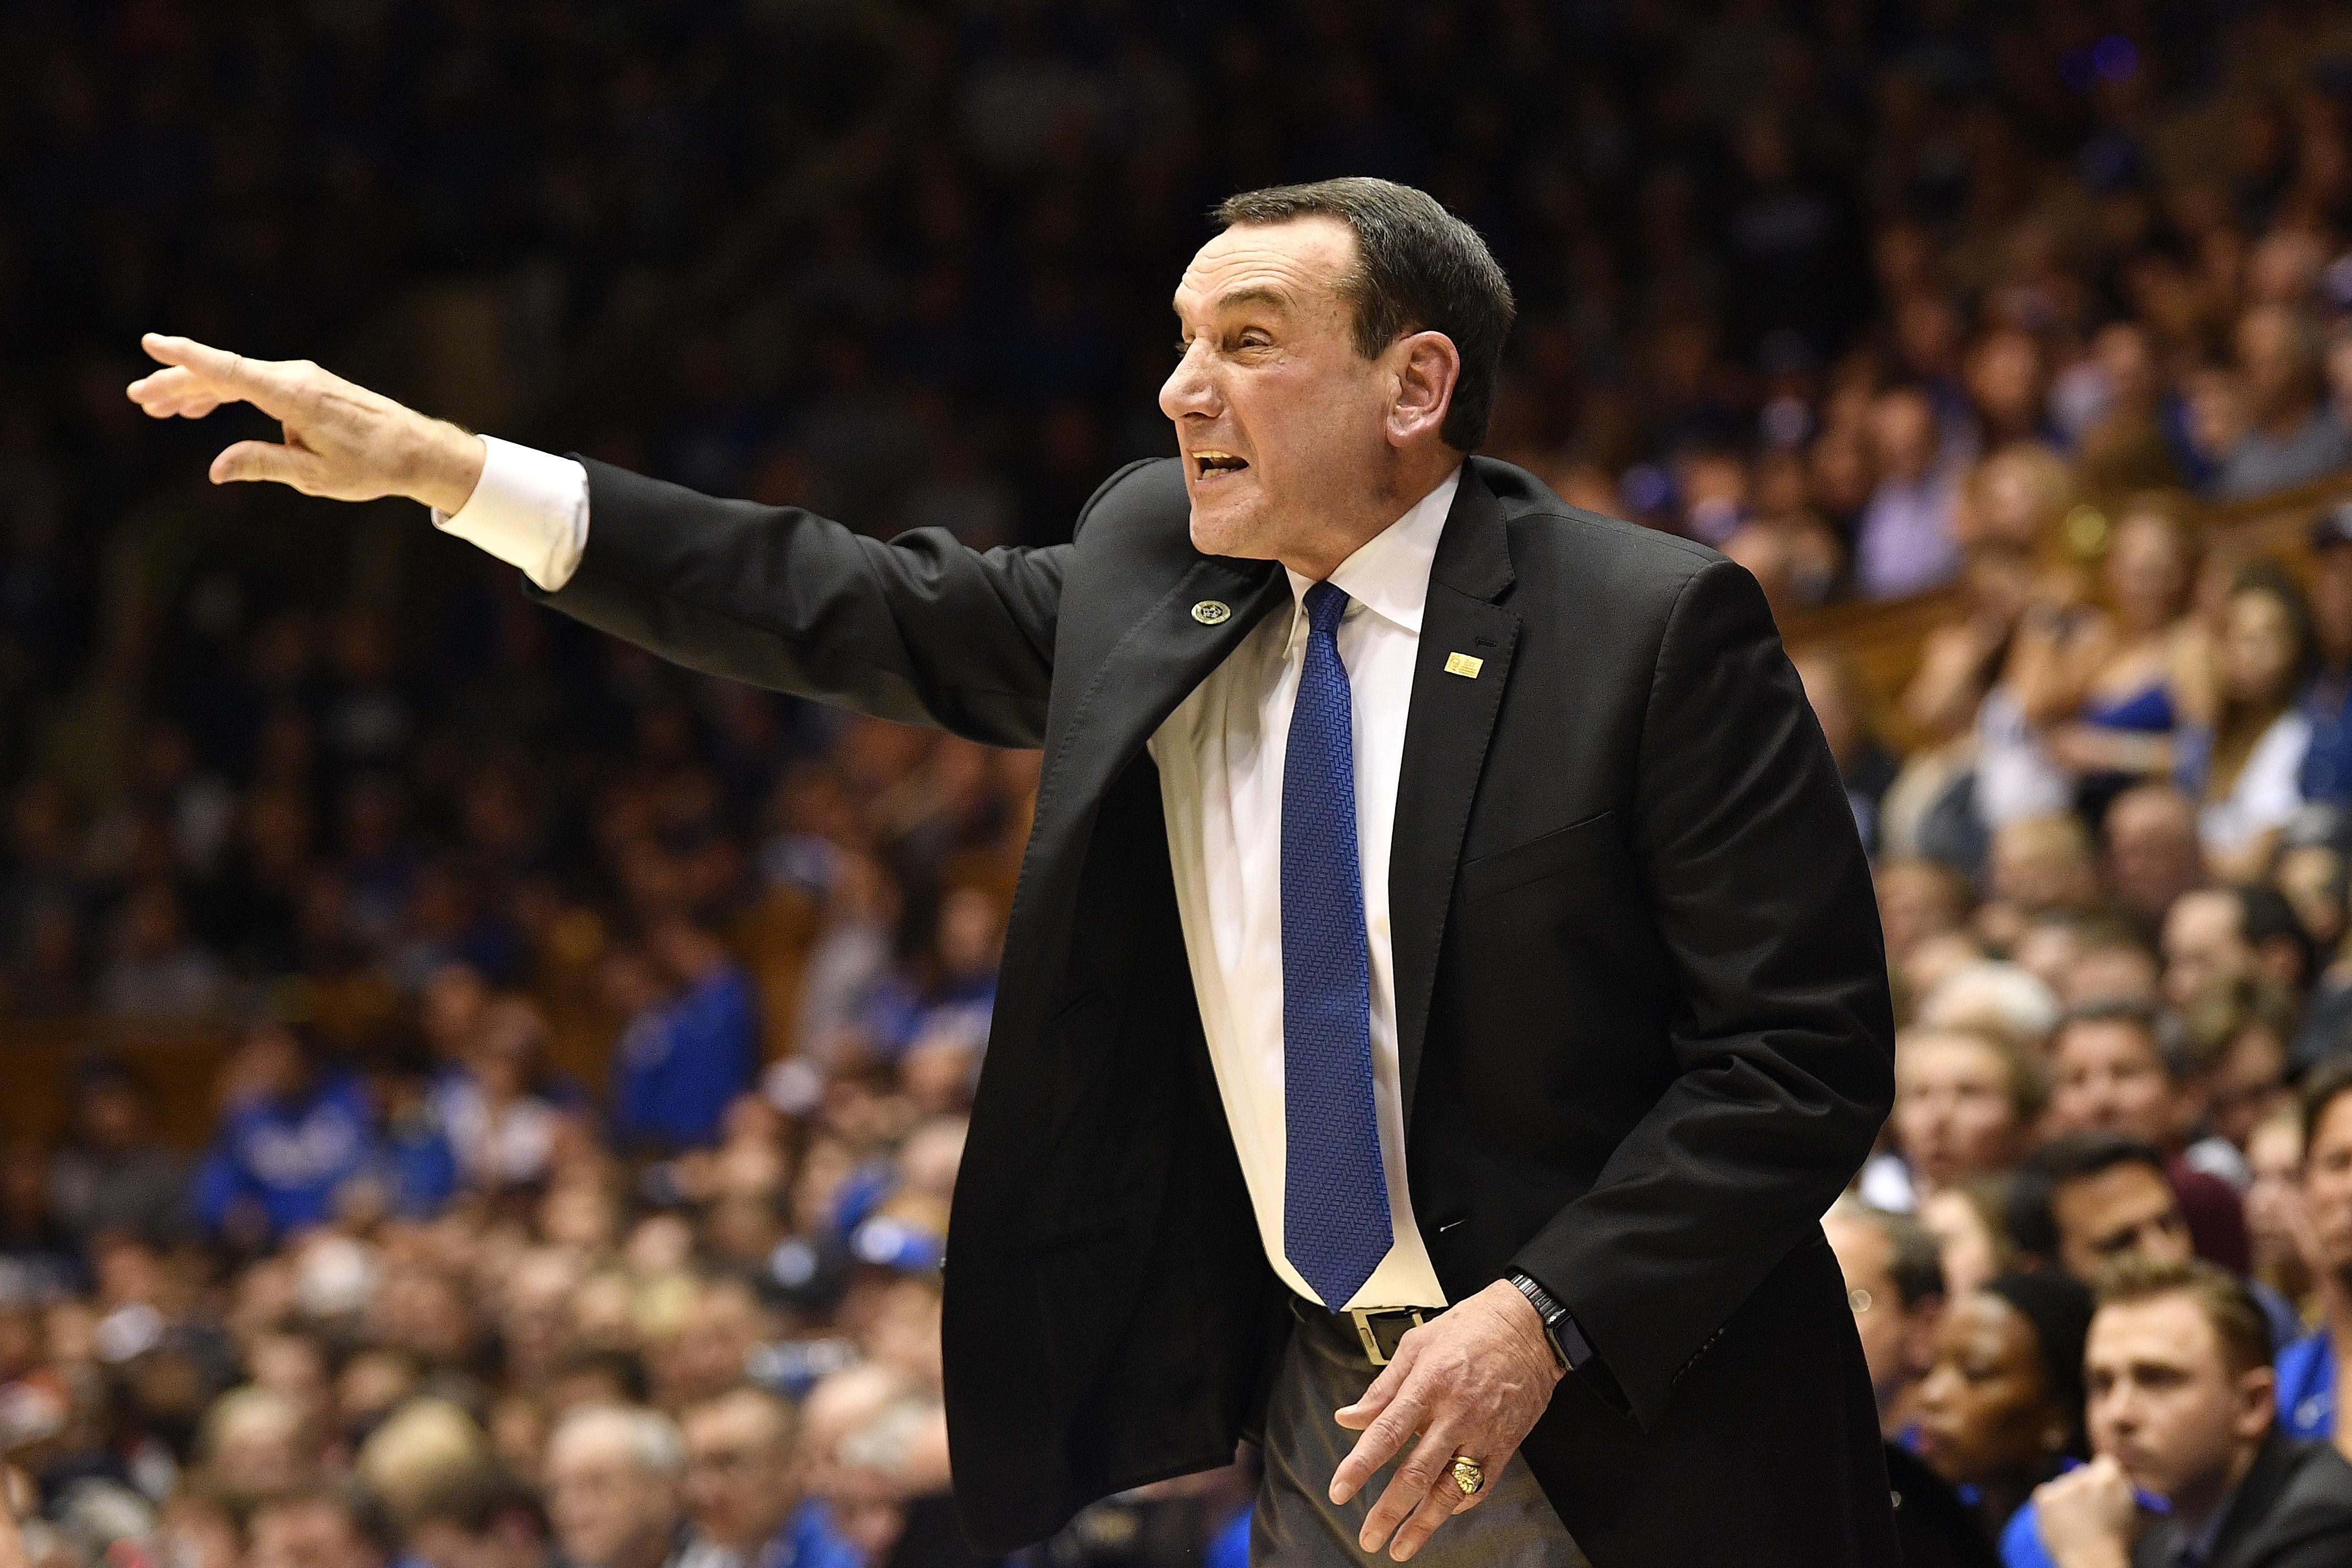 Coach K gesticulating and yelling in a suit on the sideline, as he does